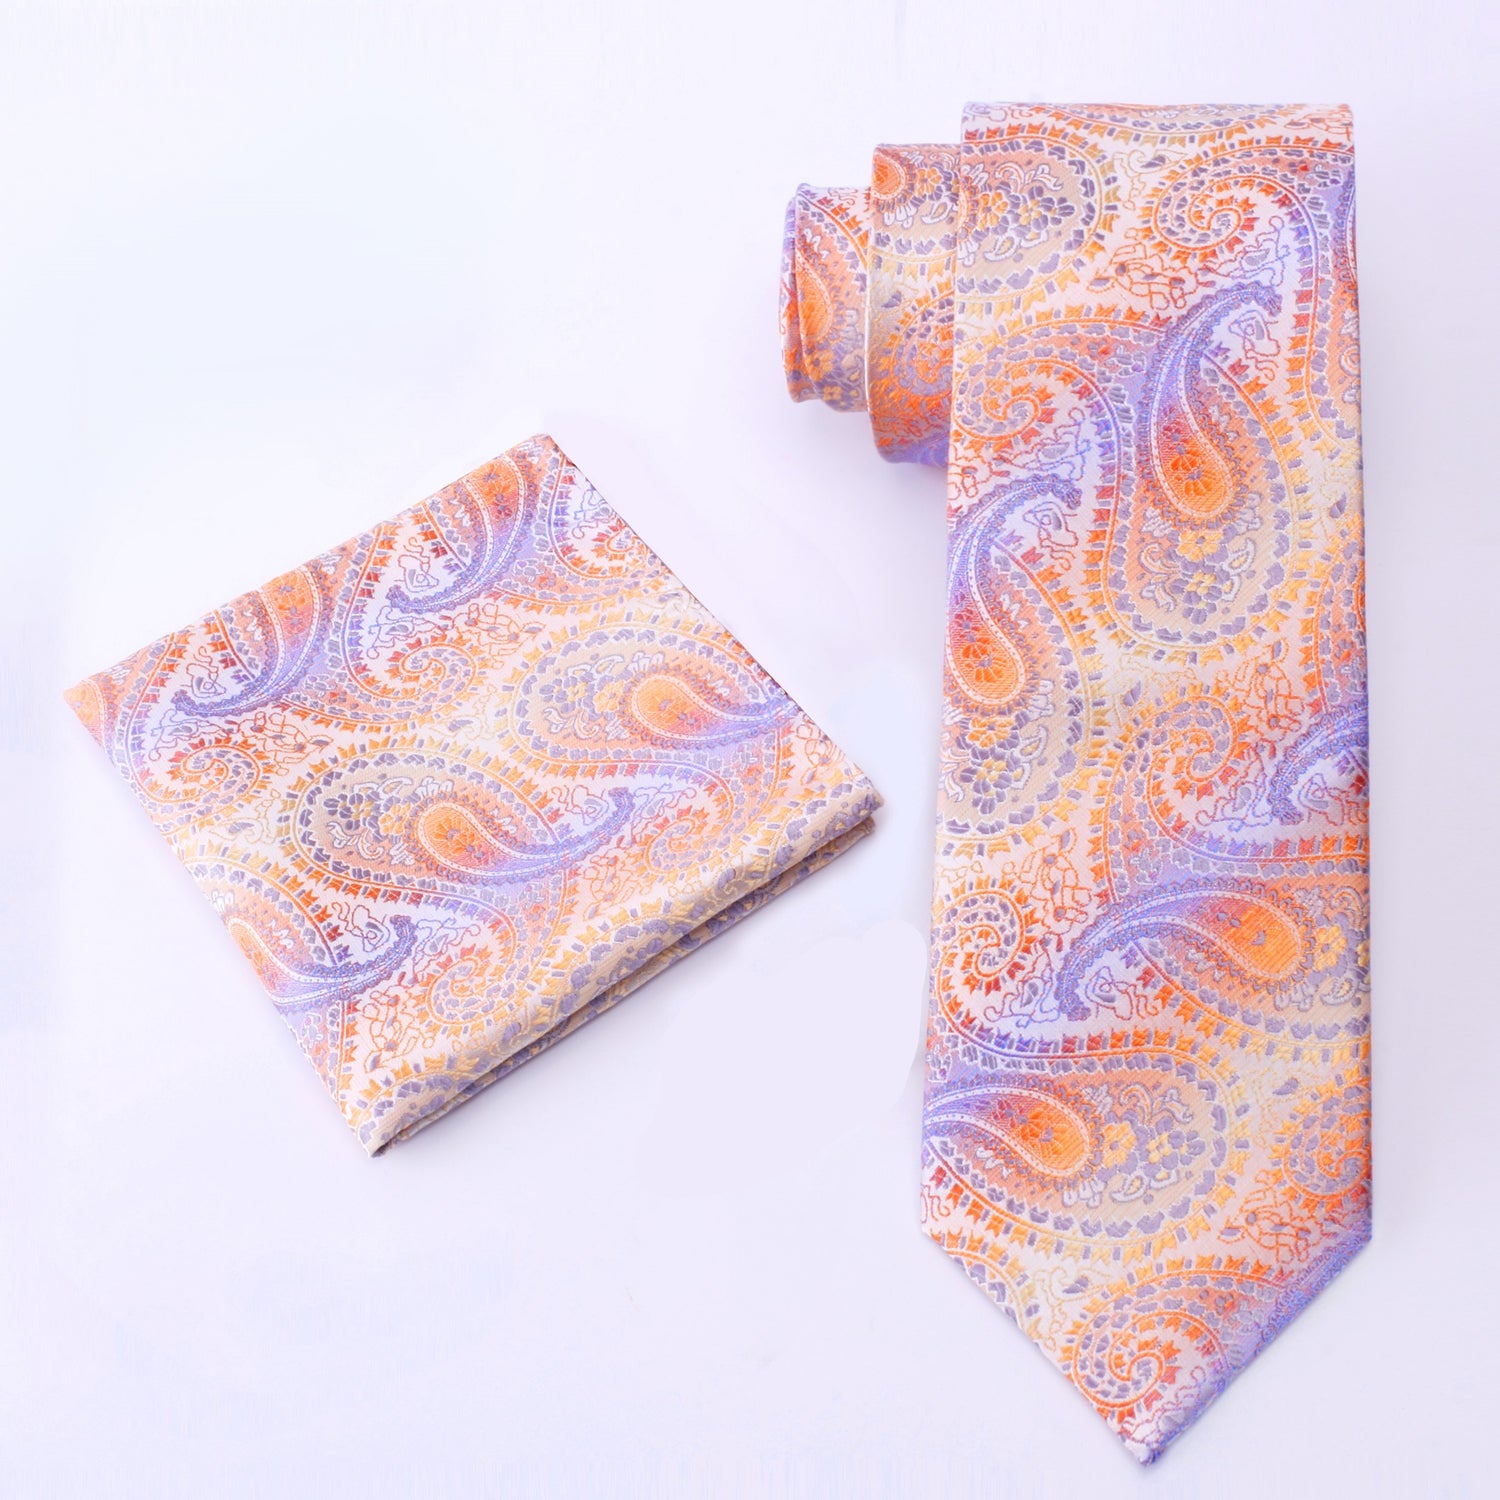 Alt View: A Peach, Purple Paisley Pattern Necktie With Matching Pocket Square